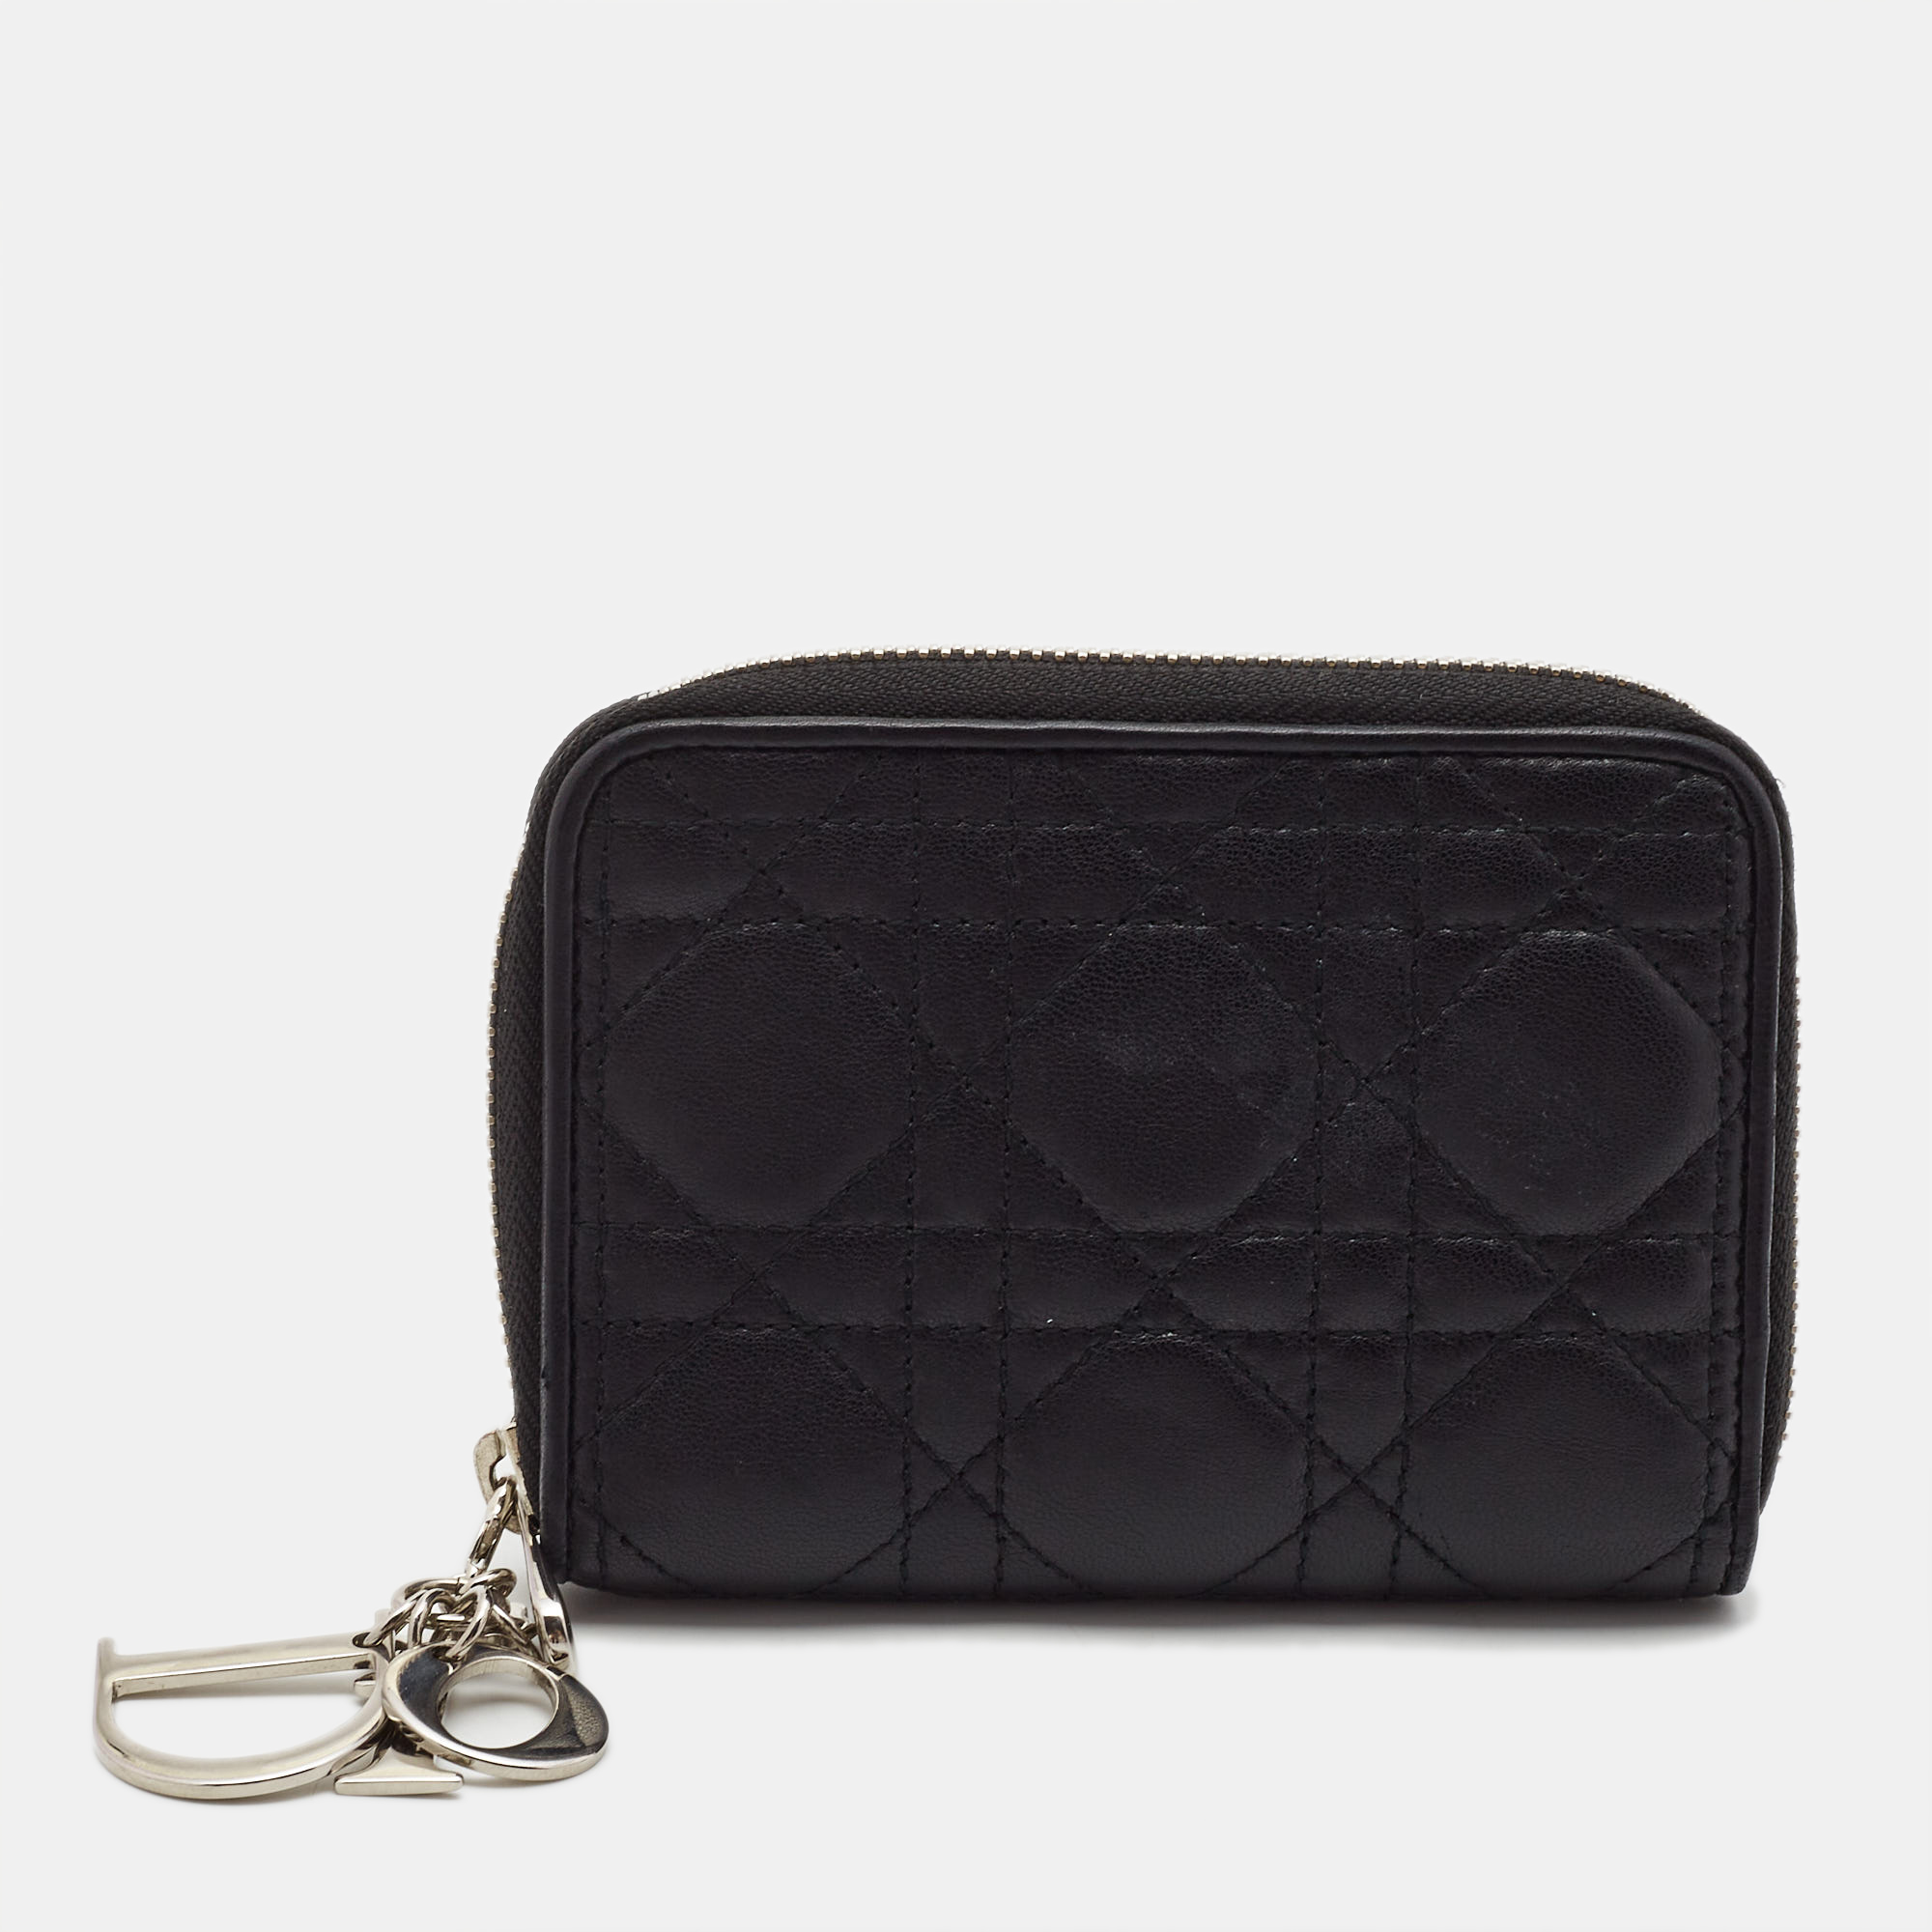 Dior black cannage leather lady dior zip compact wallet